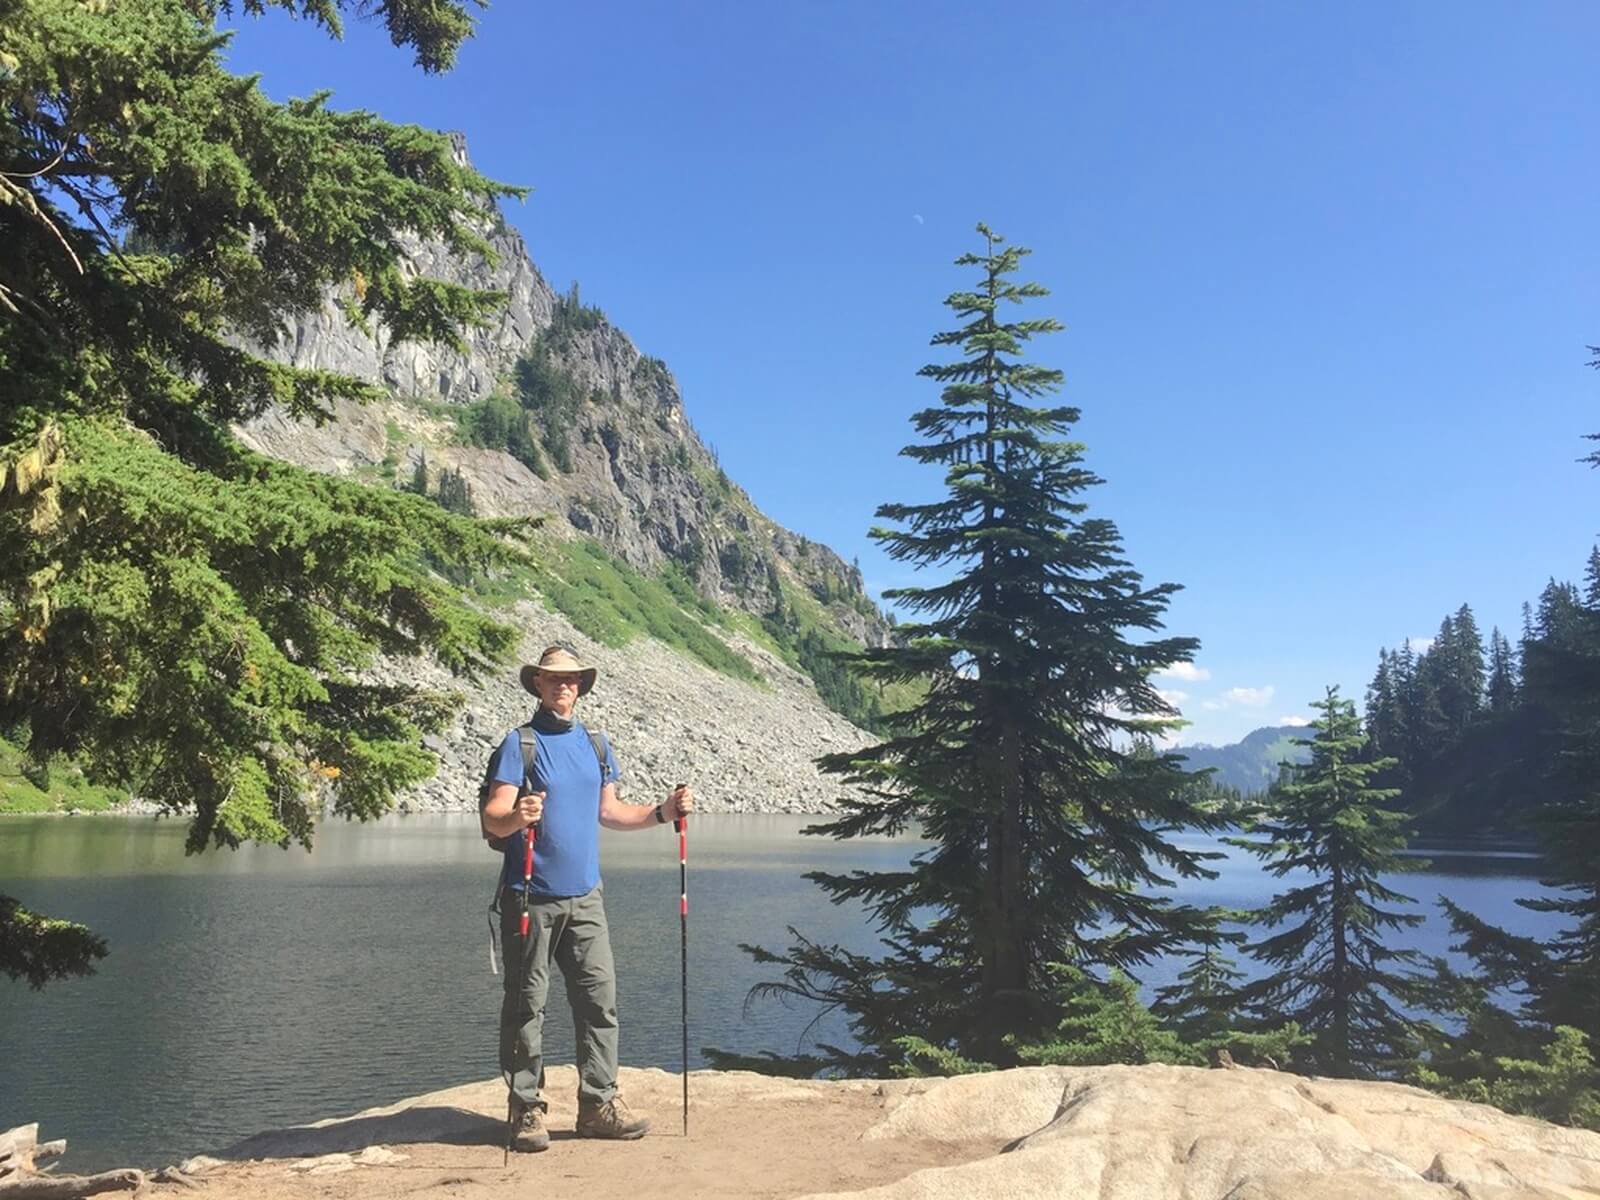 Image of Lake Vahalla, Stevens Pass,  Pacific Crest Trail by Steve West